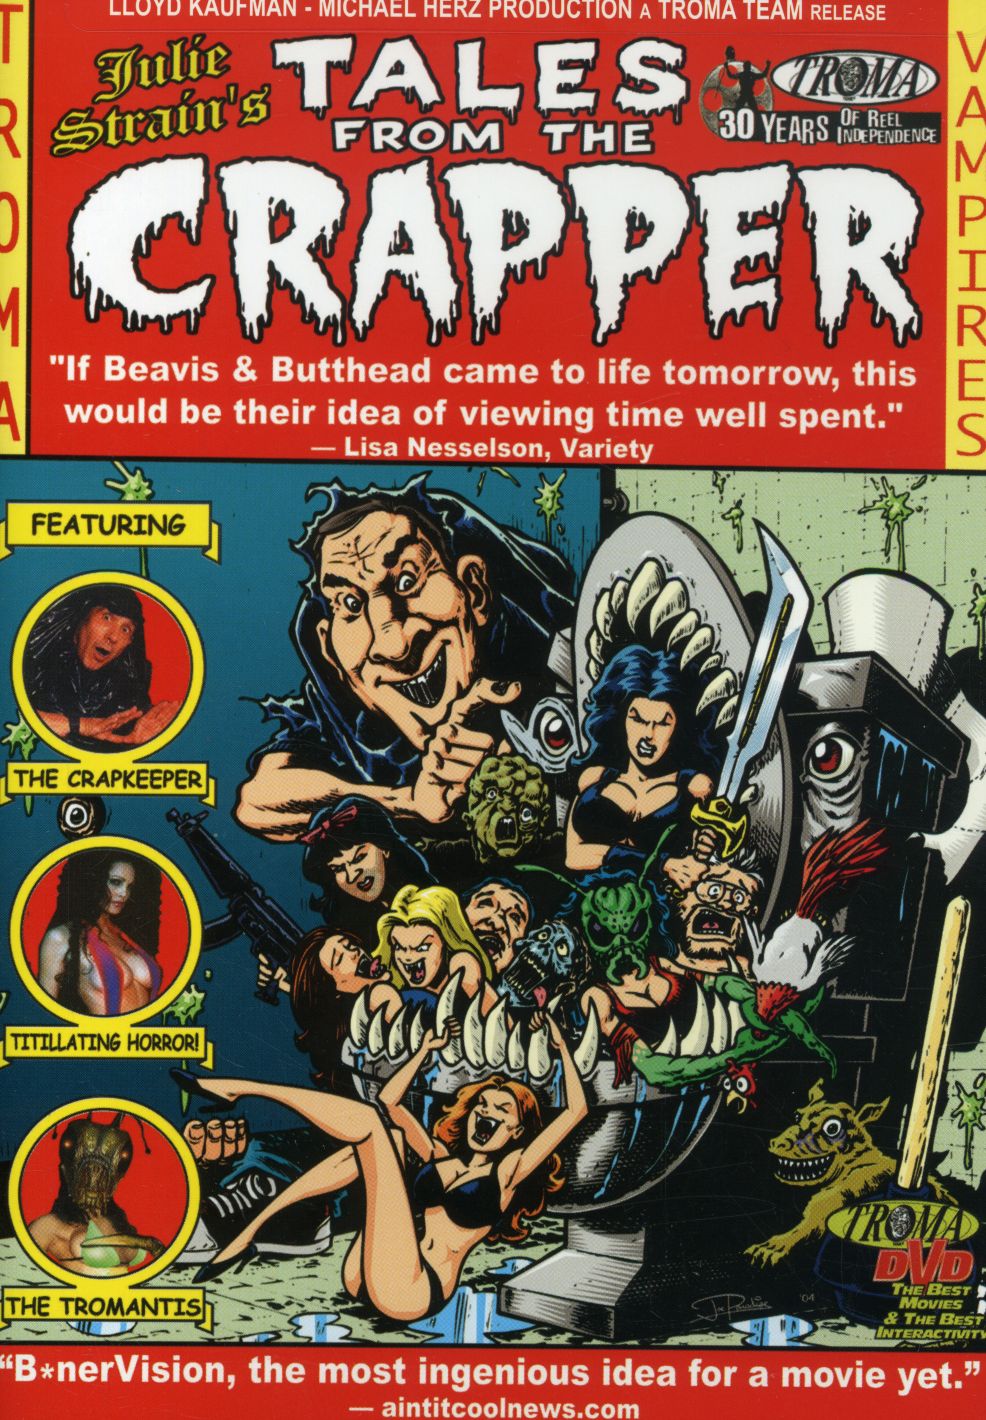 TALES FROM THE CRAPPER (POSTER)